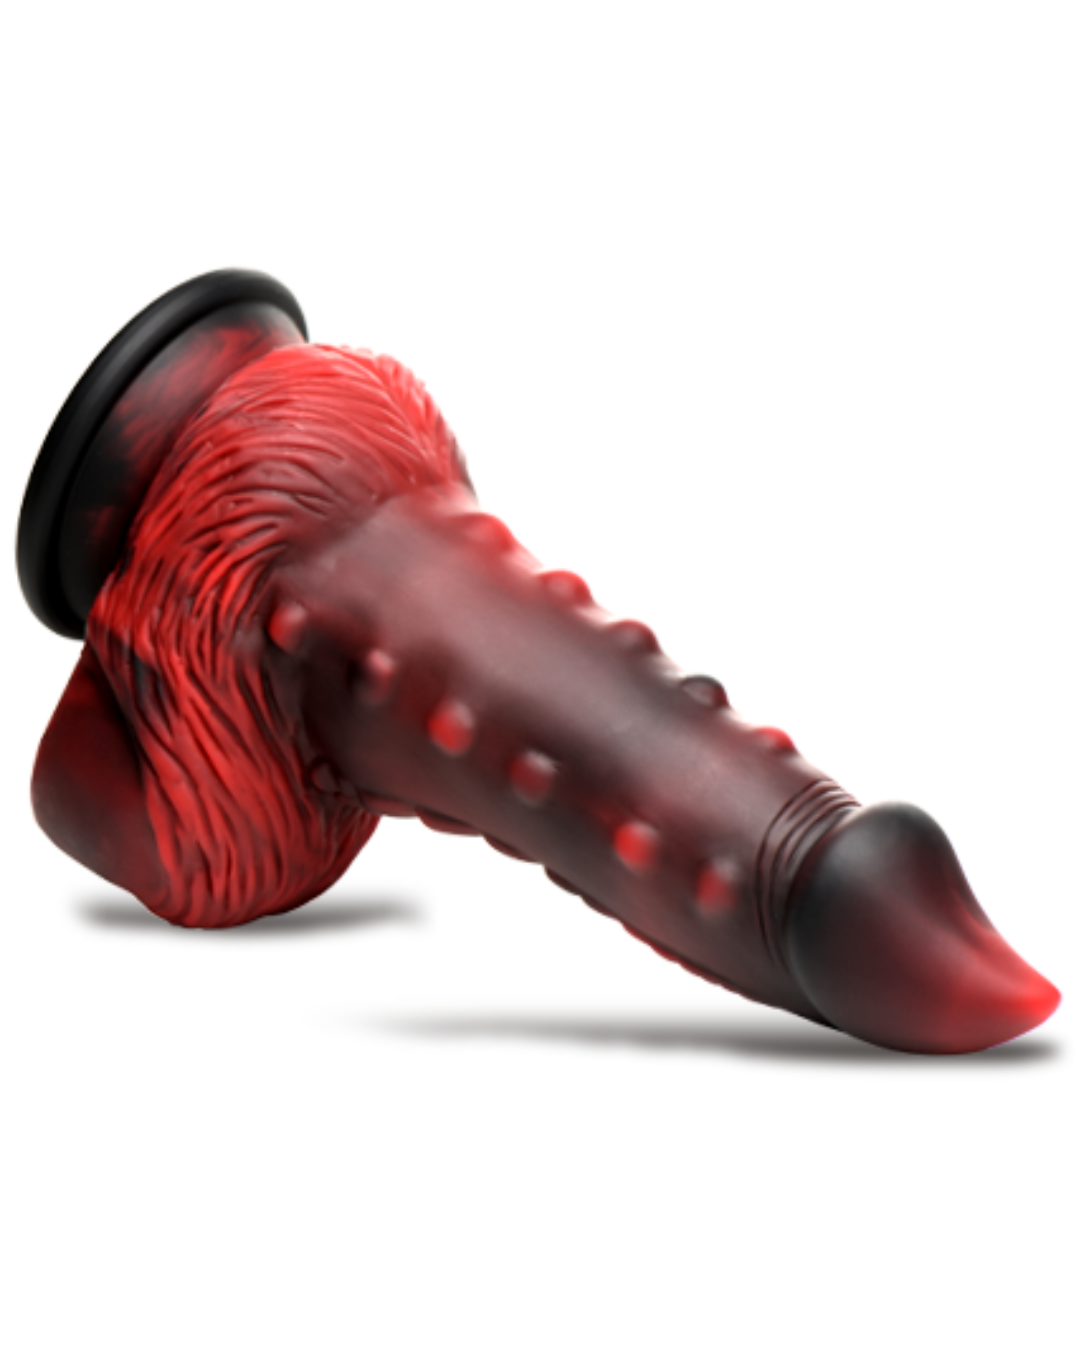 Lava Demon Thick Nubbed 8 Inch Silicone Dildo horizontal showing dildo from the side on a white background